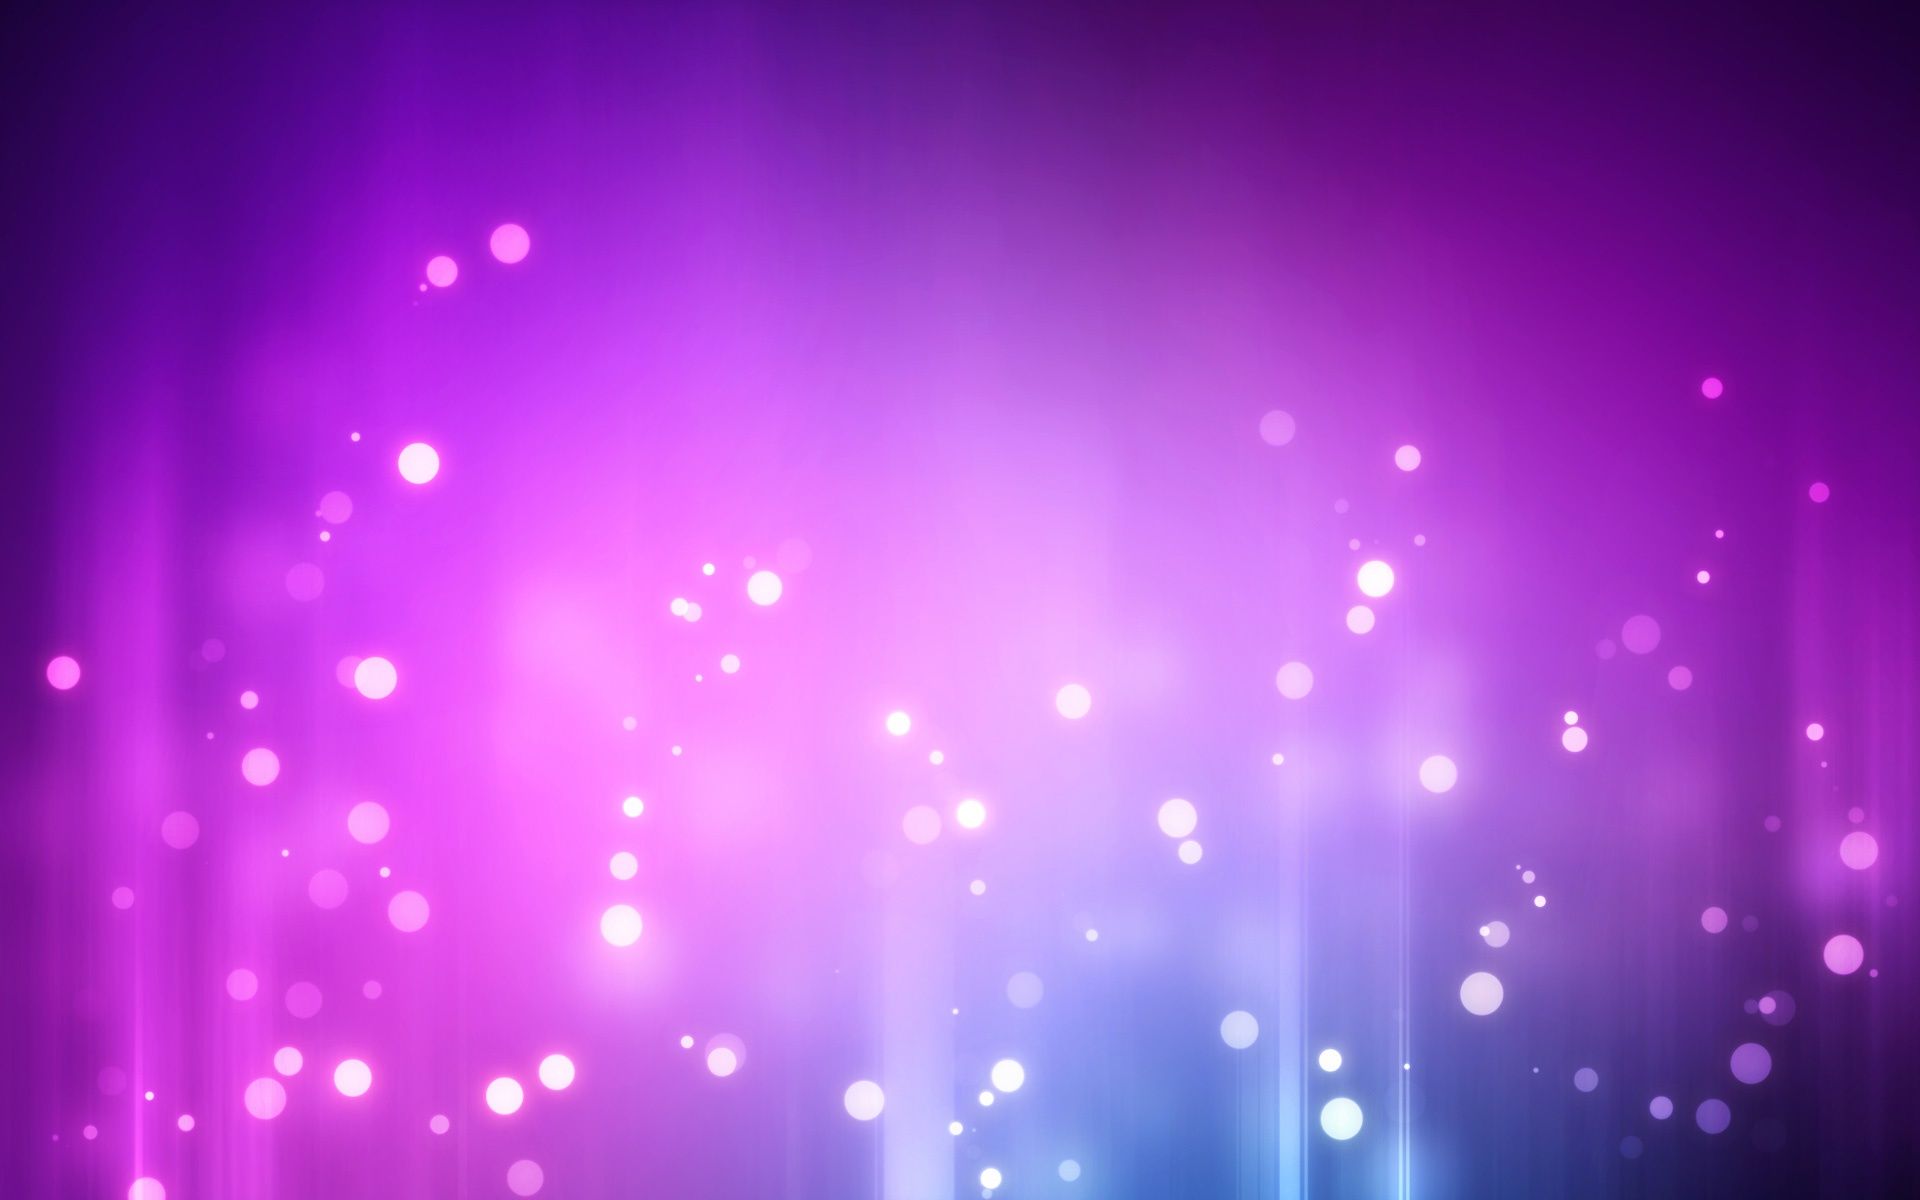 Awesome Purple Backgrounds wallpaper | 1920x1200 | #9950